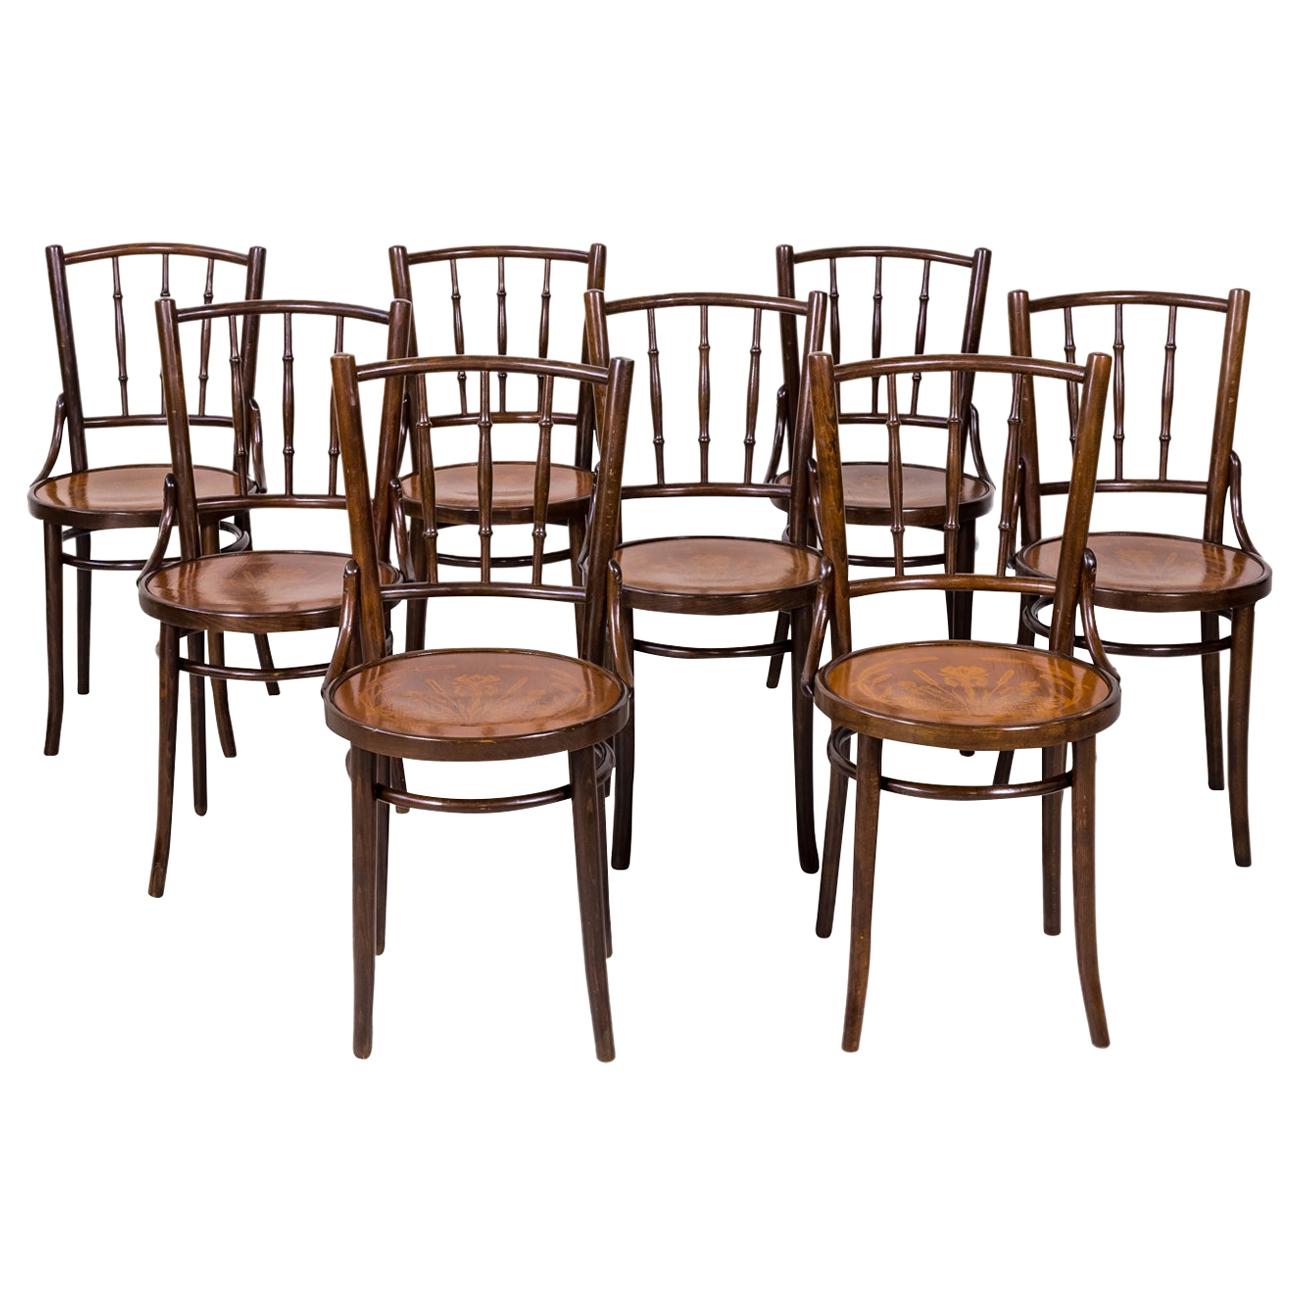 Set of 8 Classic Bentwood Cafe Chairs by Mundus and J. & J. Kohn